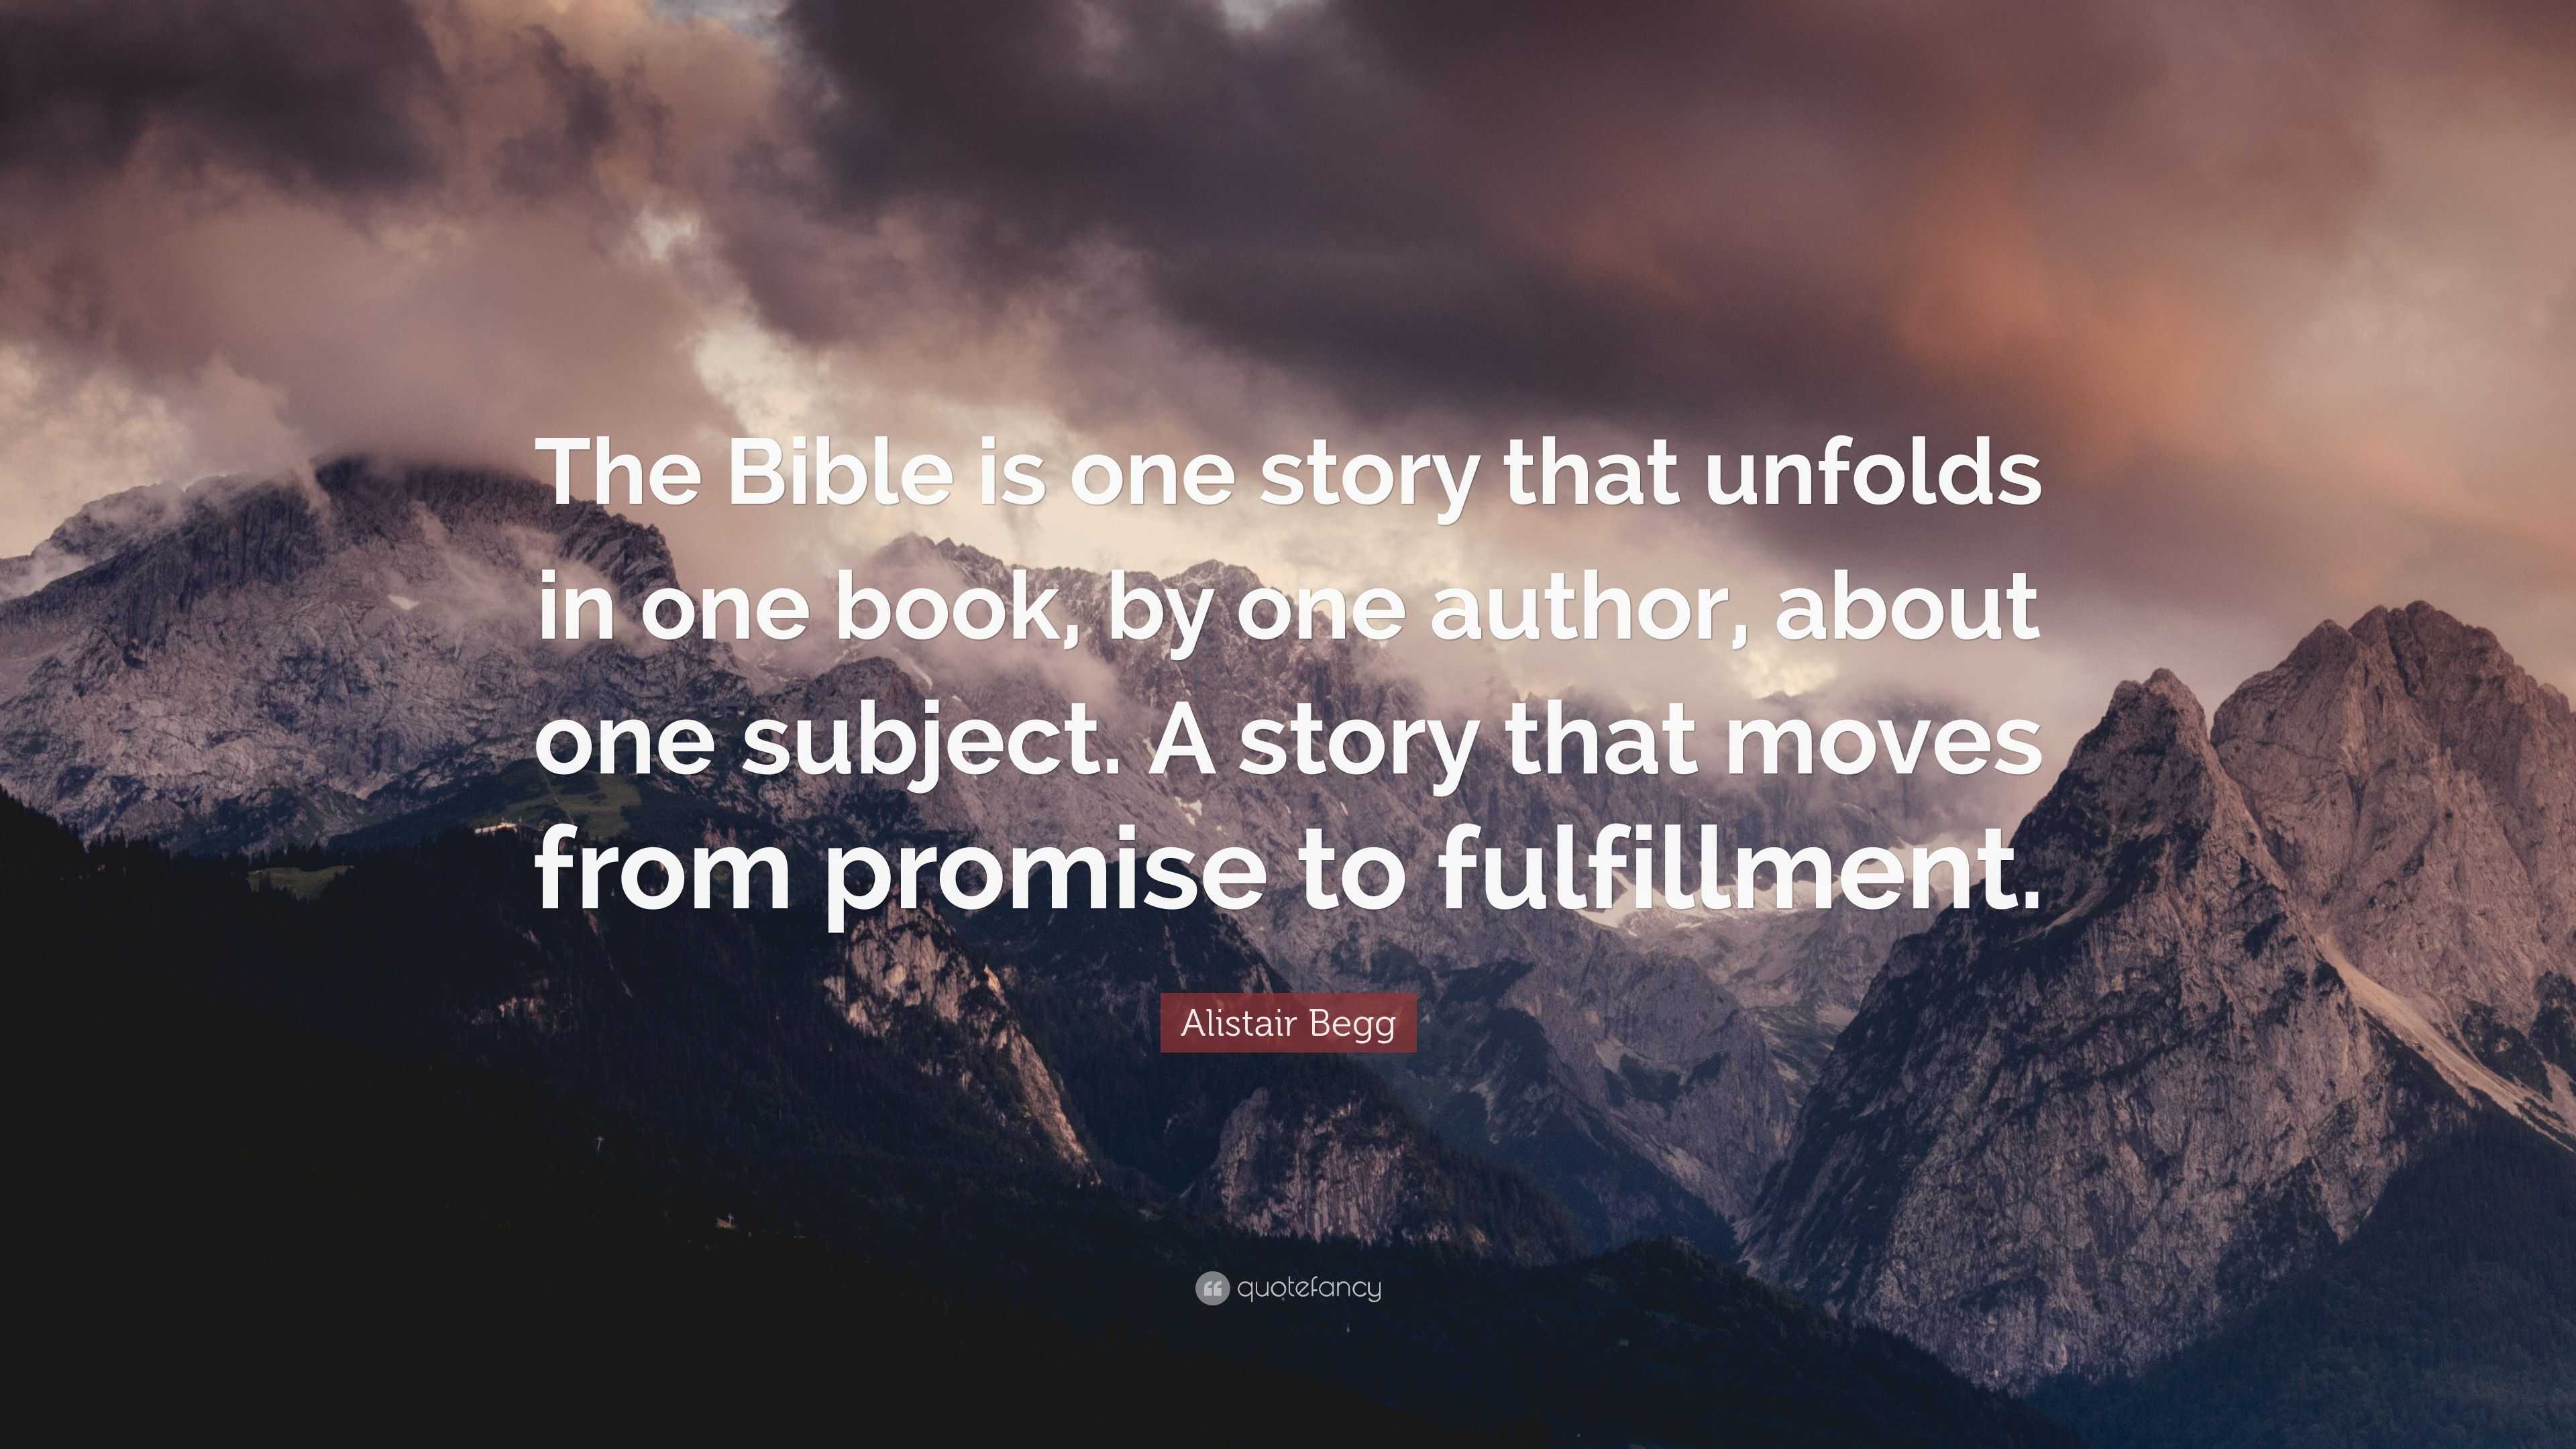 Alistair Begg Quote: “The Bible is one story that unfolds in one book ...